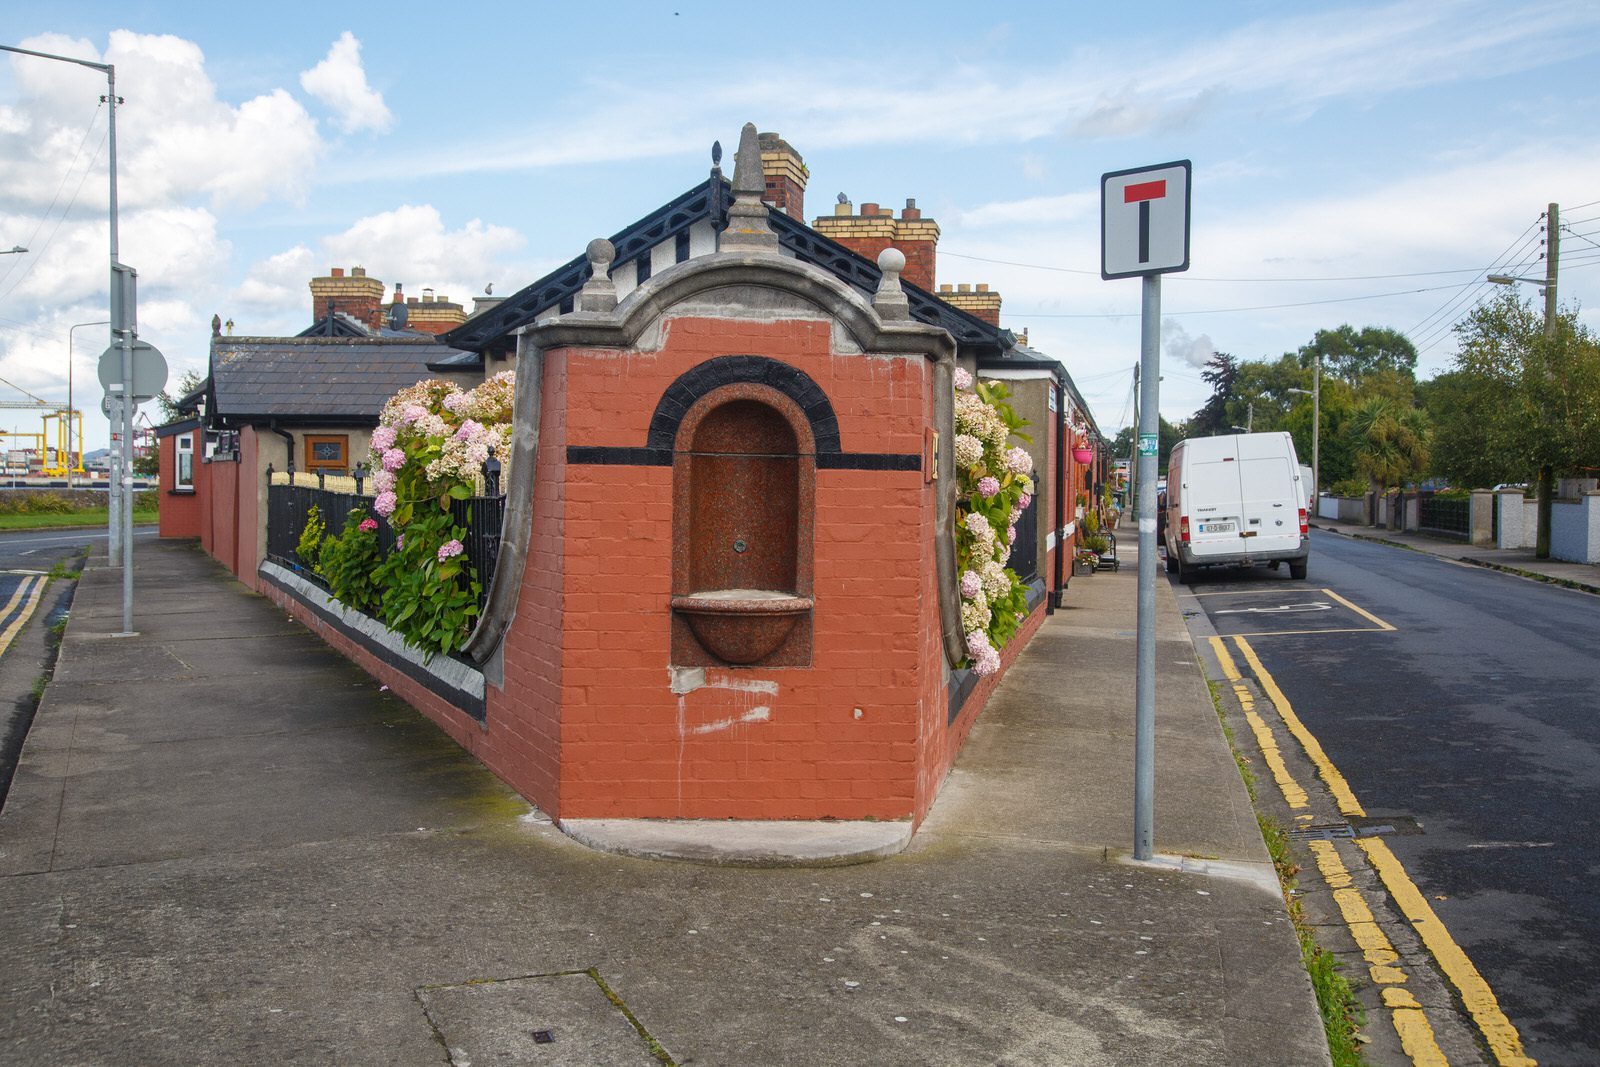 THE MEETING OF FOUR STREETS [CAMBRIDGE ROAD - RINGSEND PARK - YORK ROAD - PIGEON HOUSE ROAD]